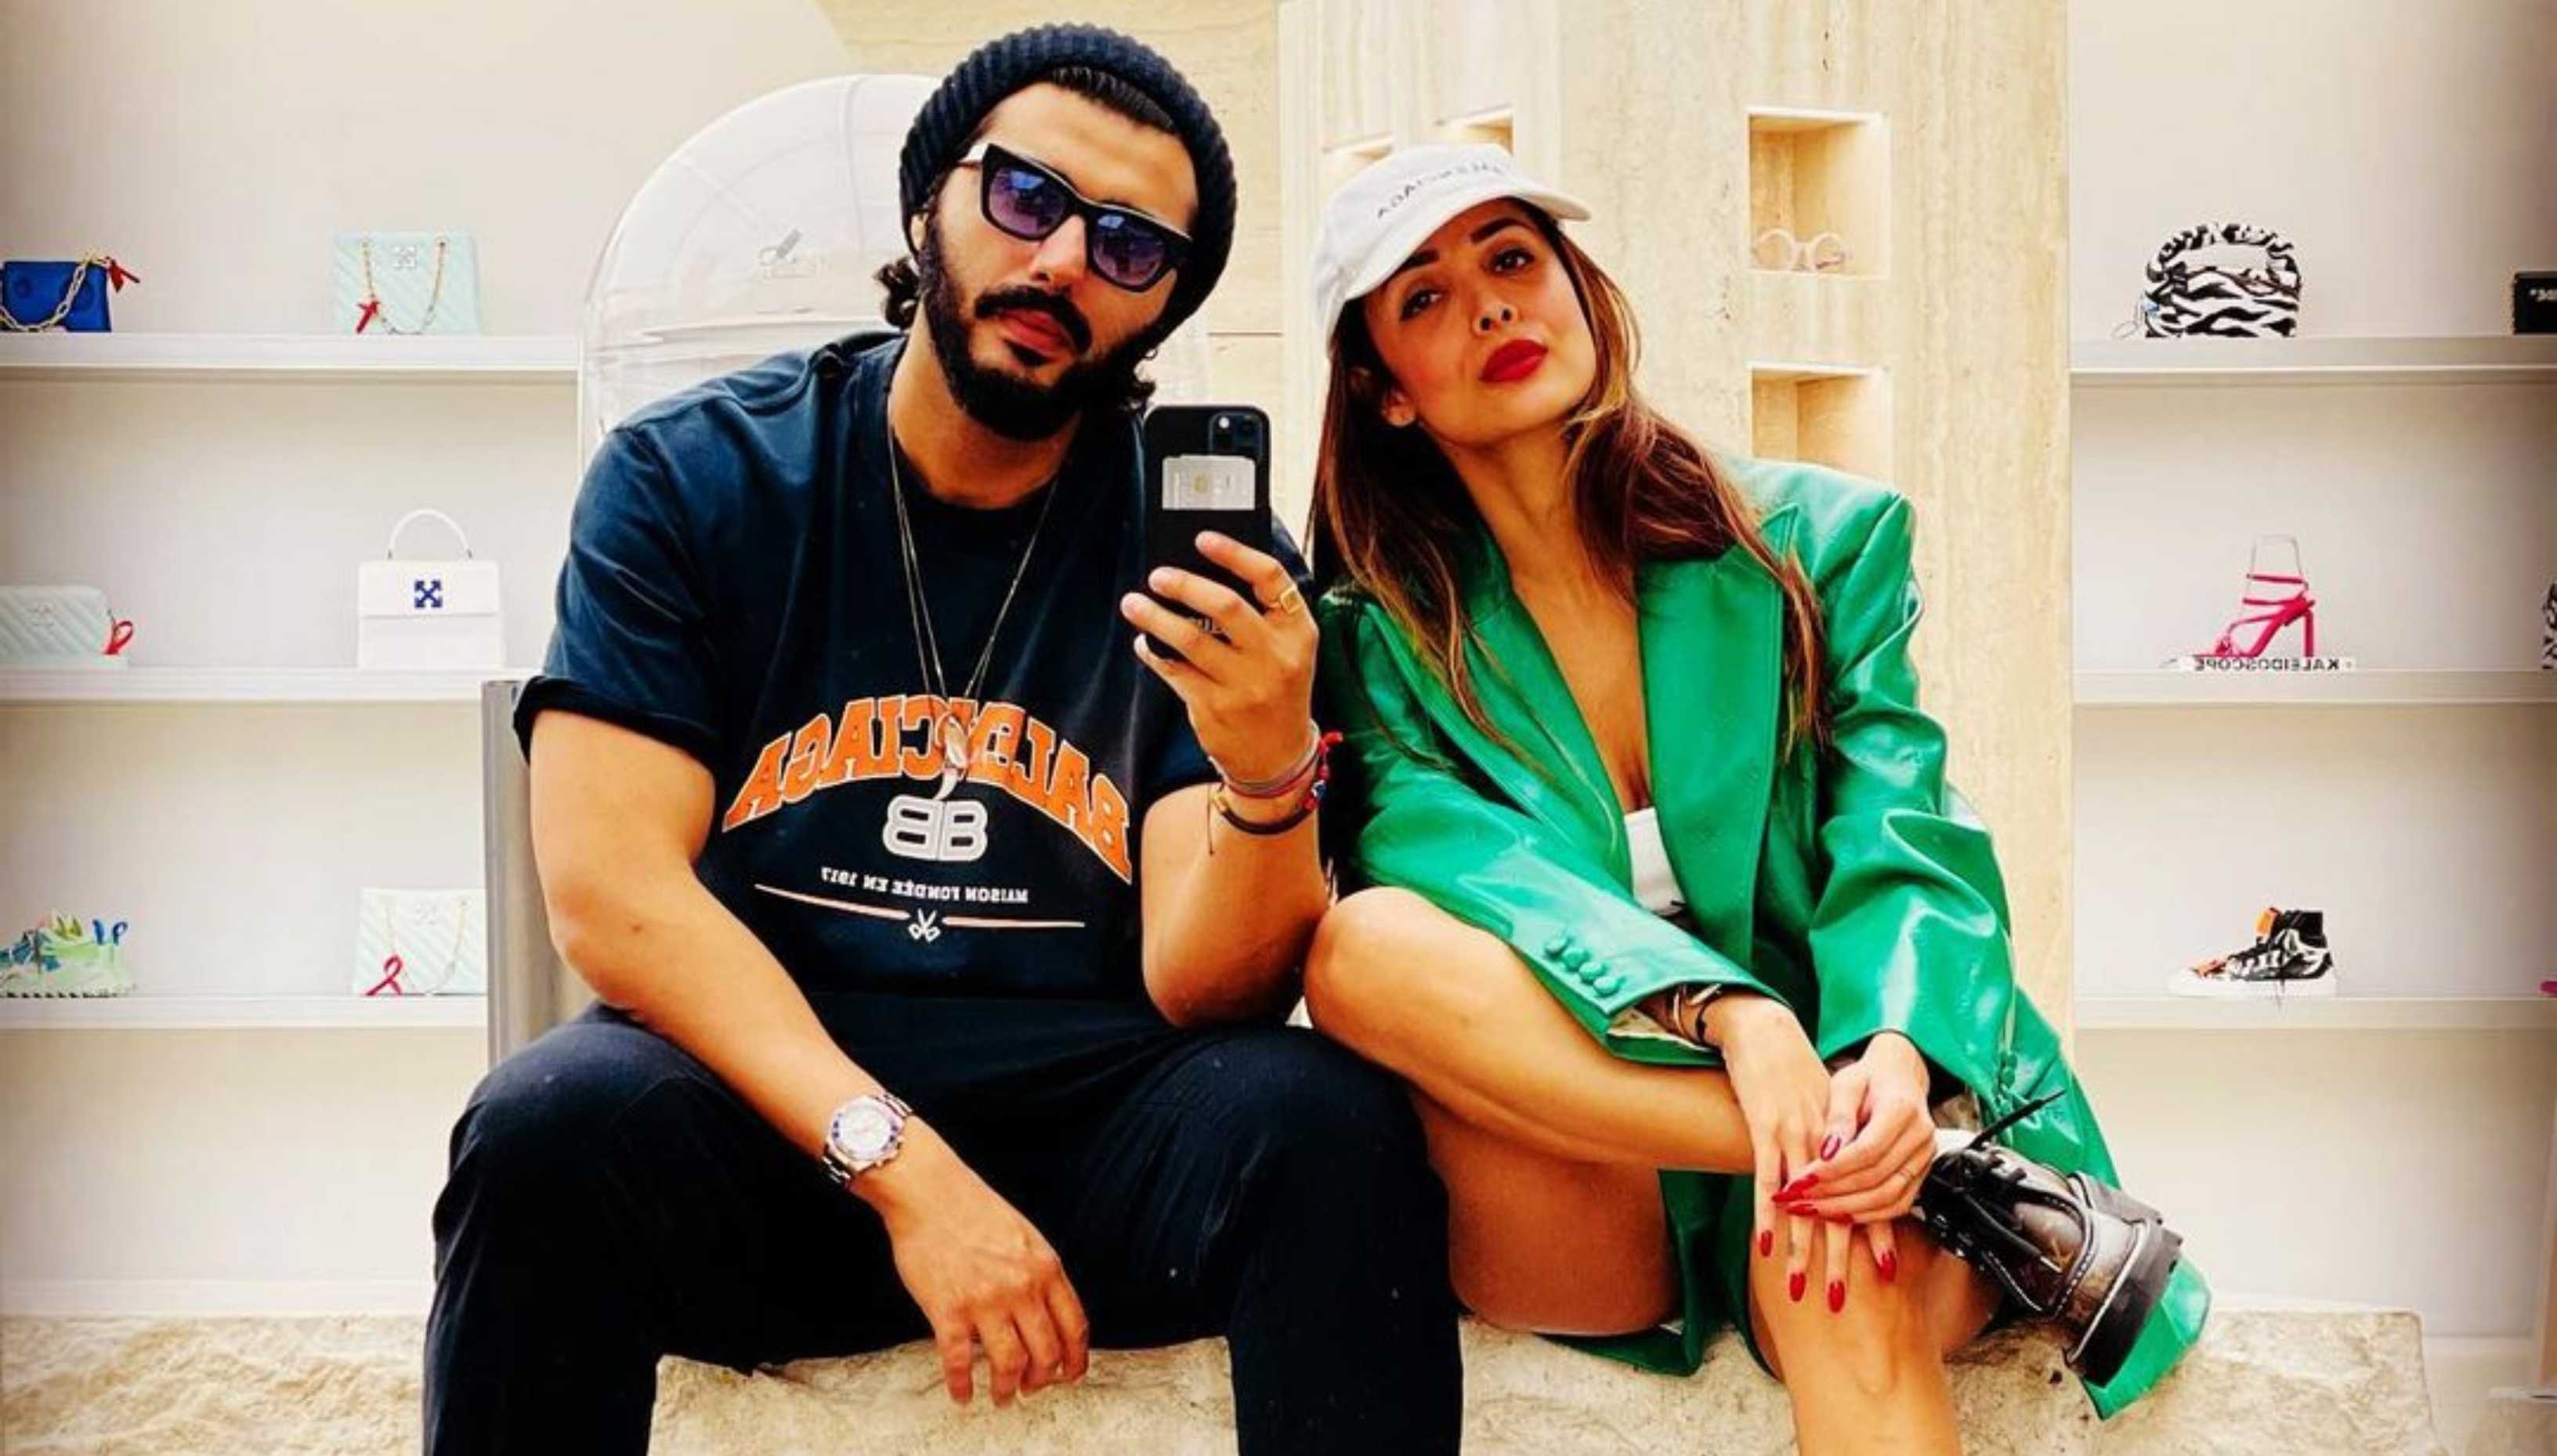 Malaika Arora feels beau Arjun Kapoor ‘gets her’ but when it comes to marriage she says, 'I am not ready ...'